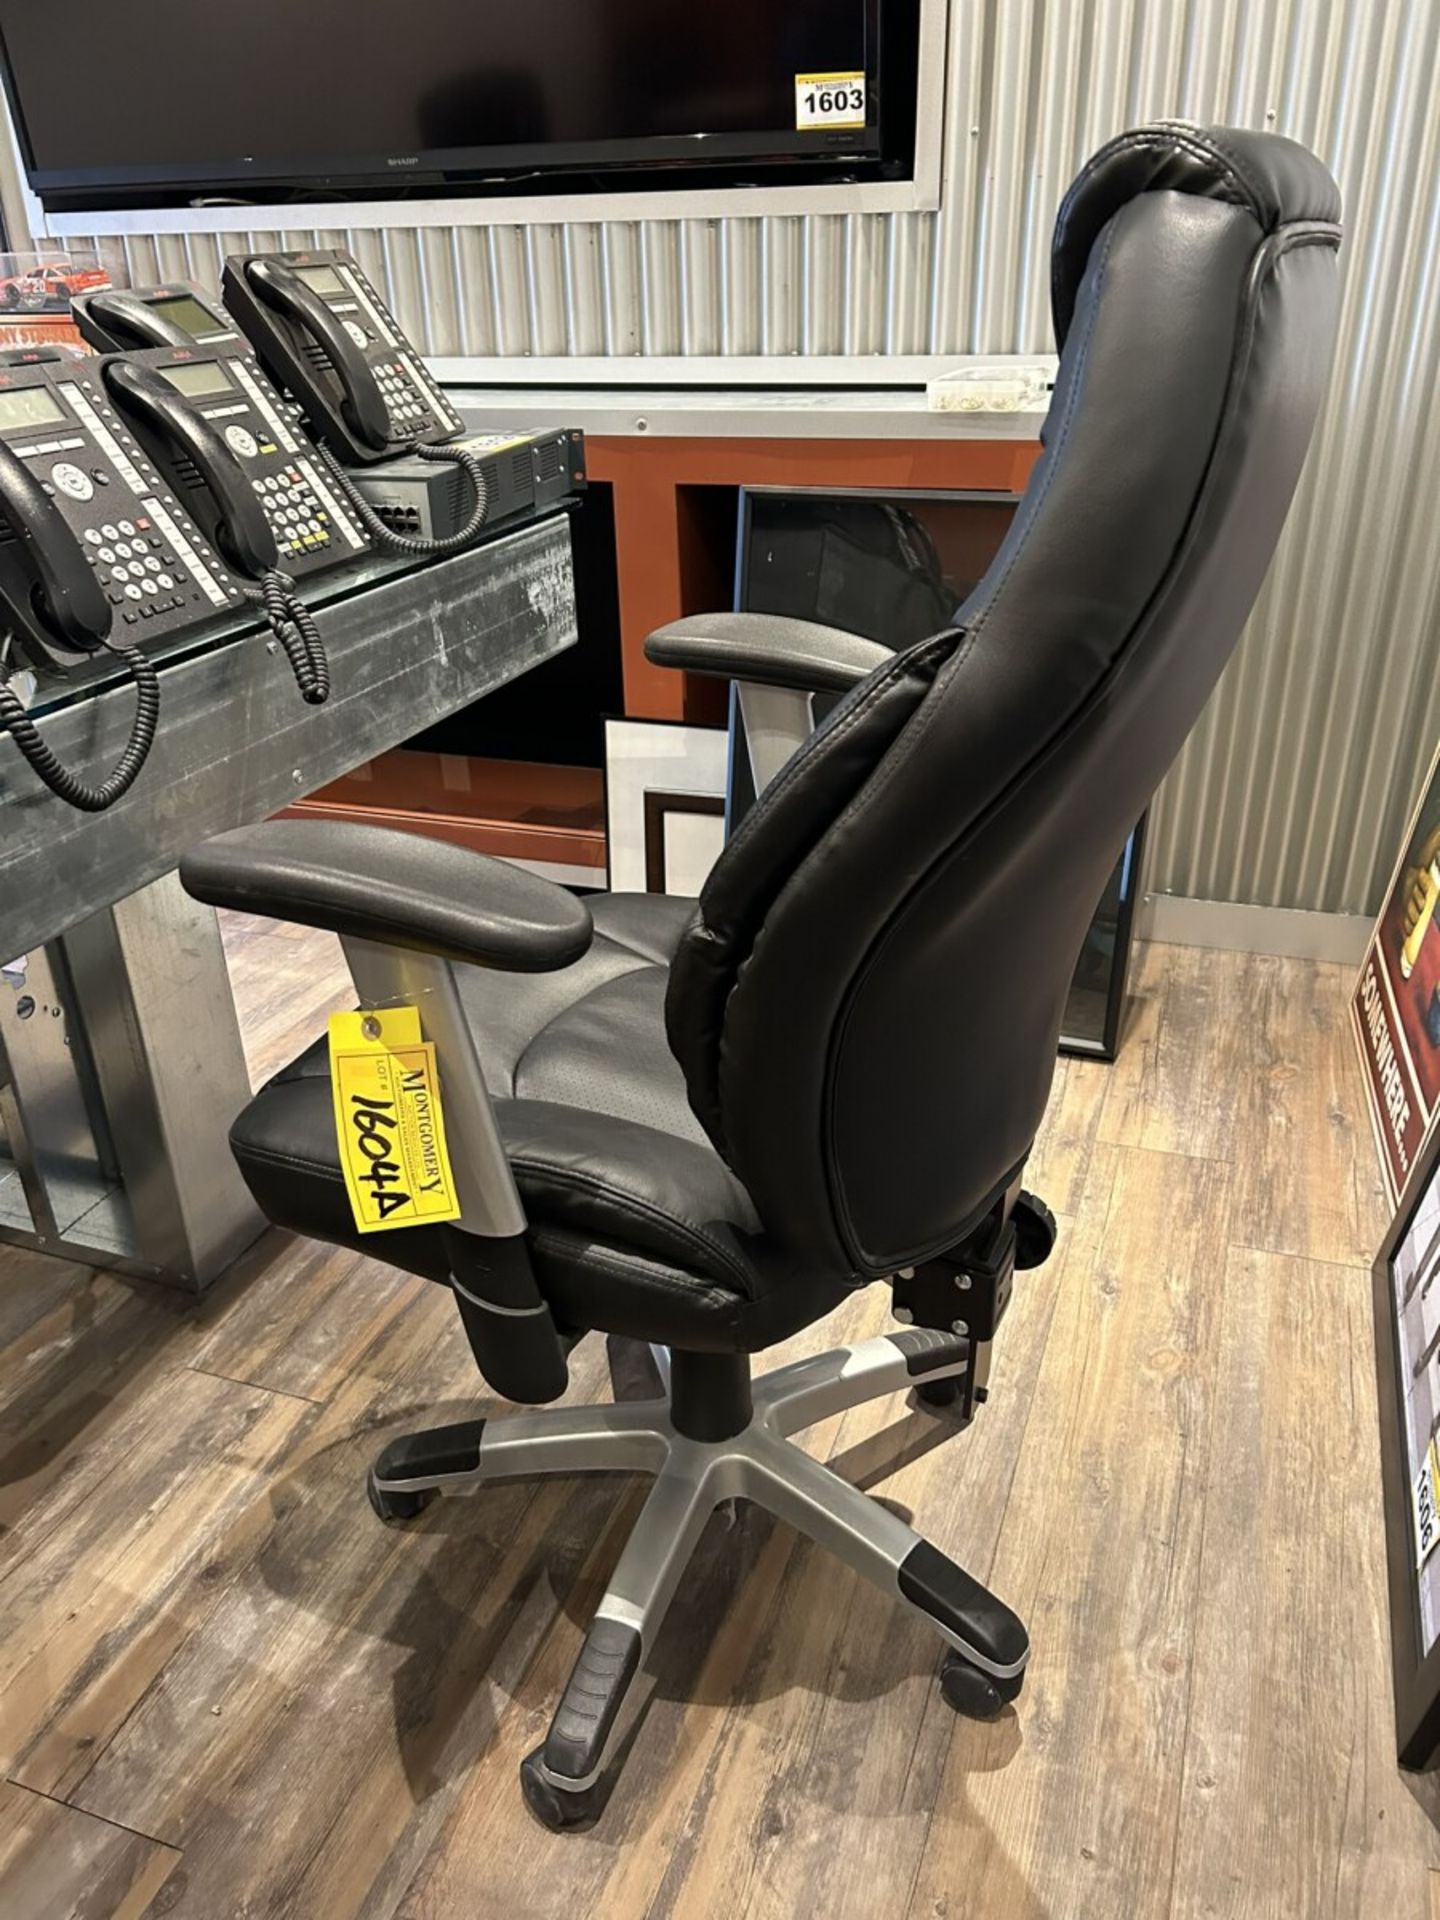 ADJUSTABLE ROLLING OFFICE CHAIR - Image 2 of 4